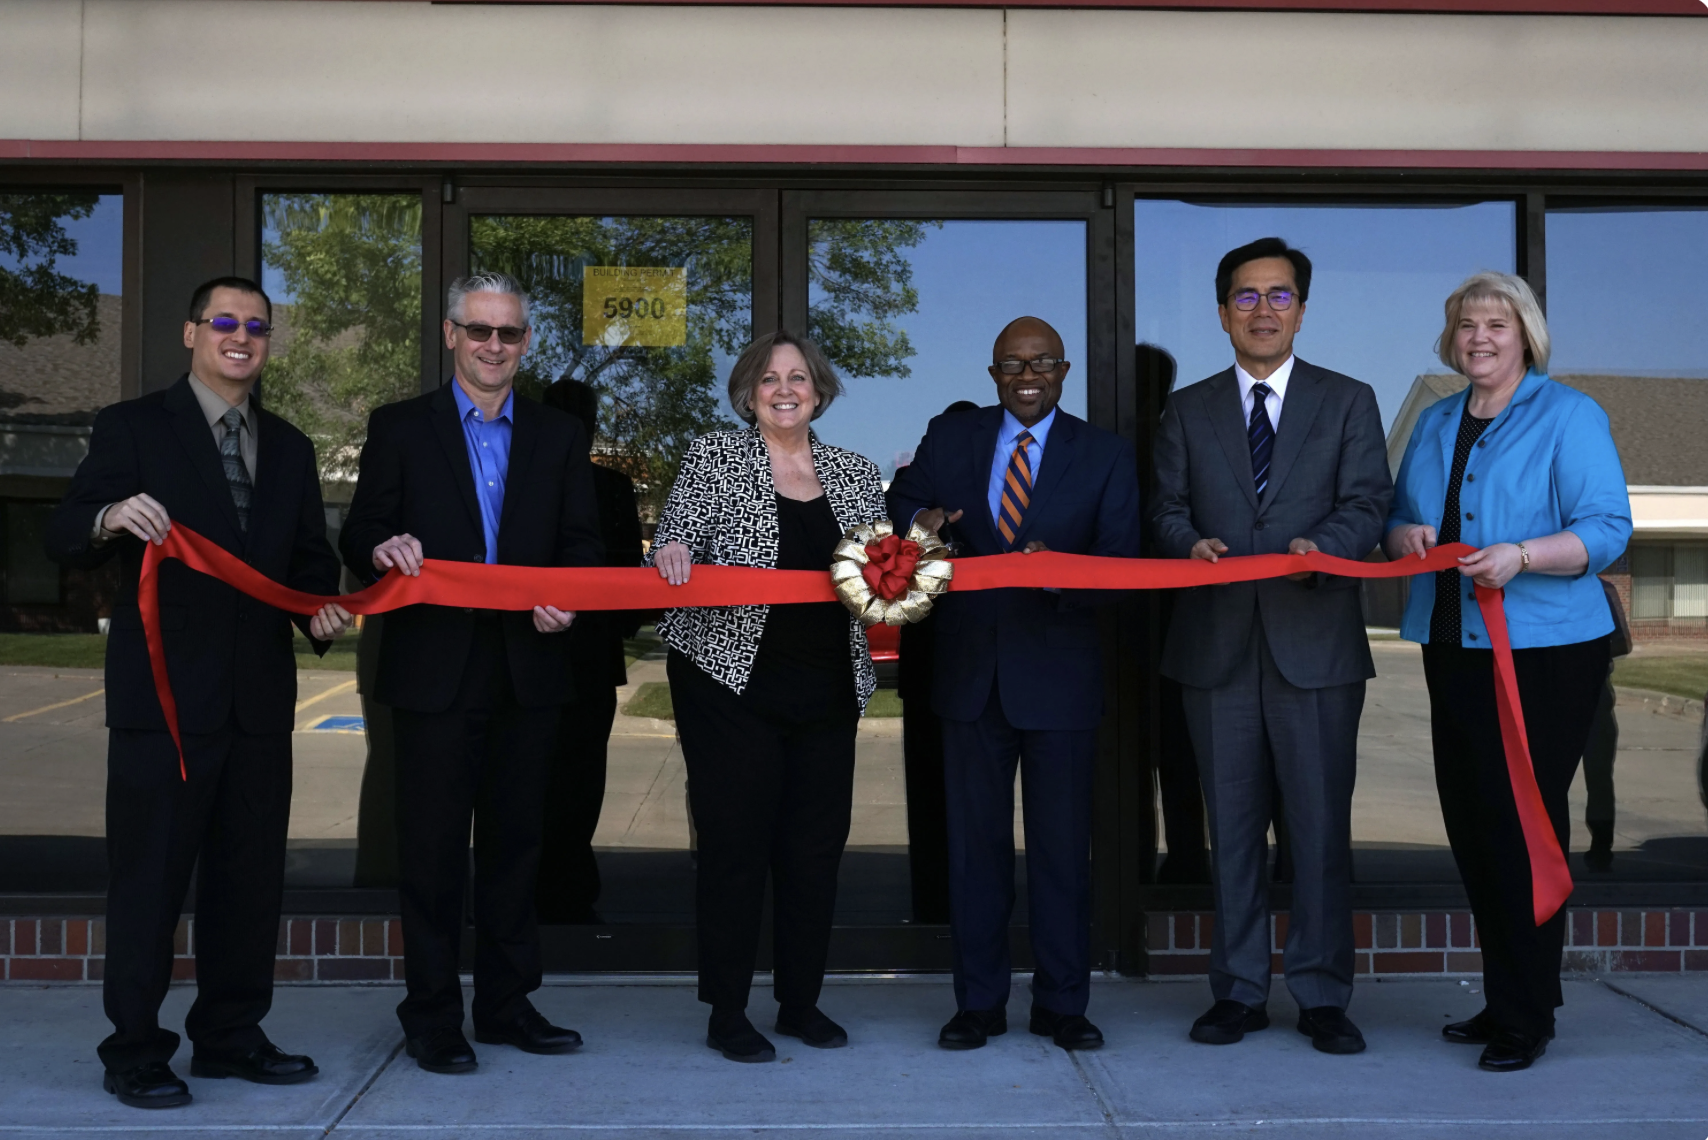 Ribbon-cutting at Christian Record Services